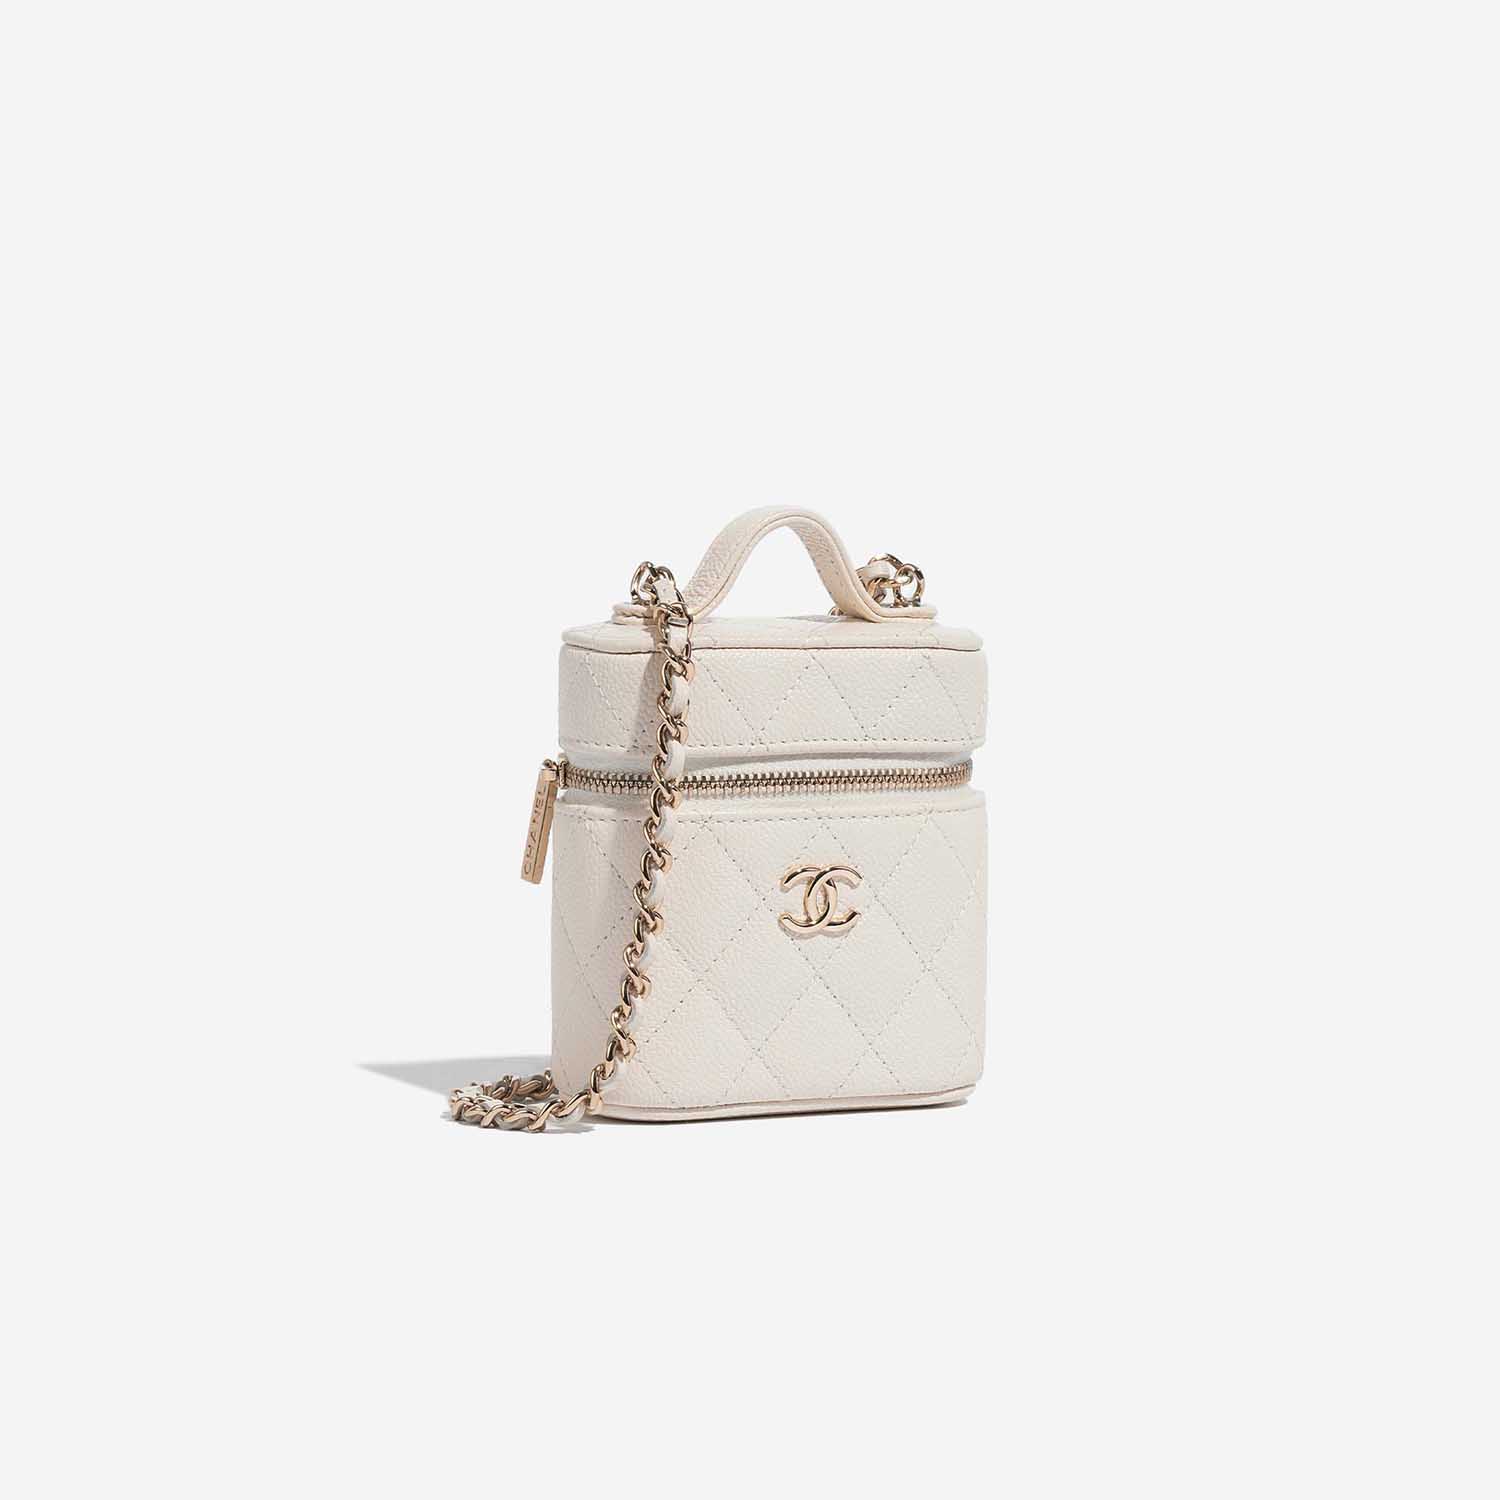 Pre-owned Chanel bag Vanity Mini Caviar White White Side Front | Sell your designer bag on Saclab.com